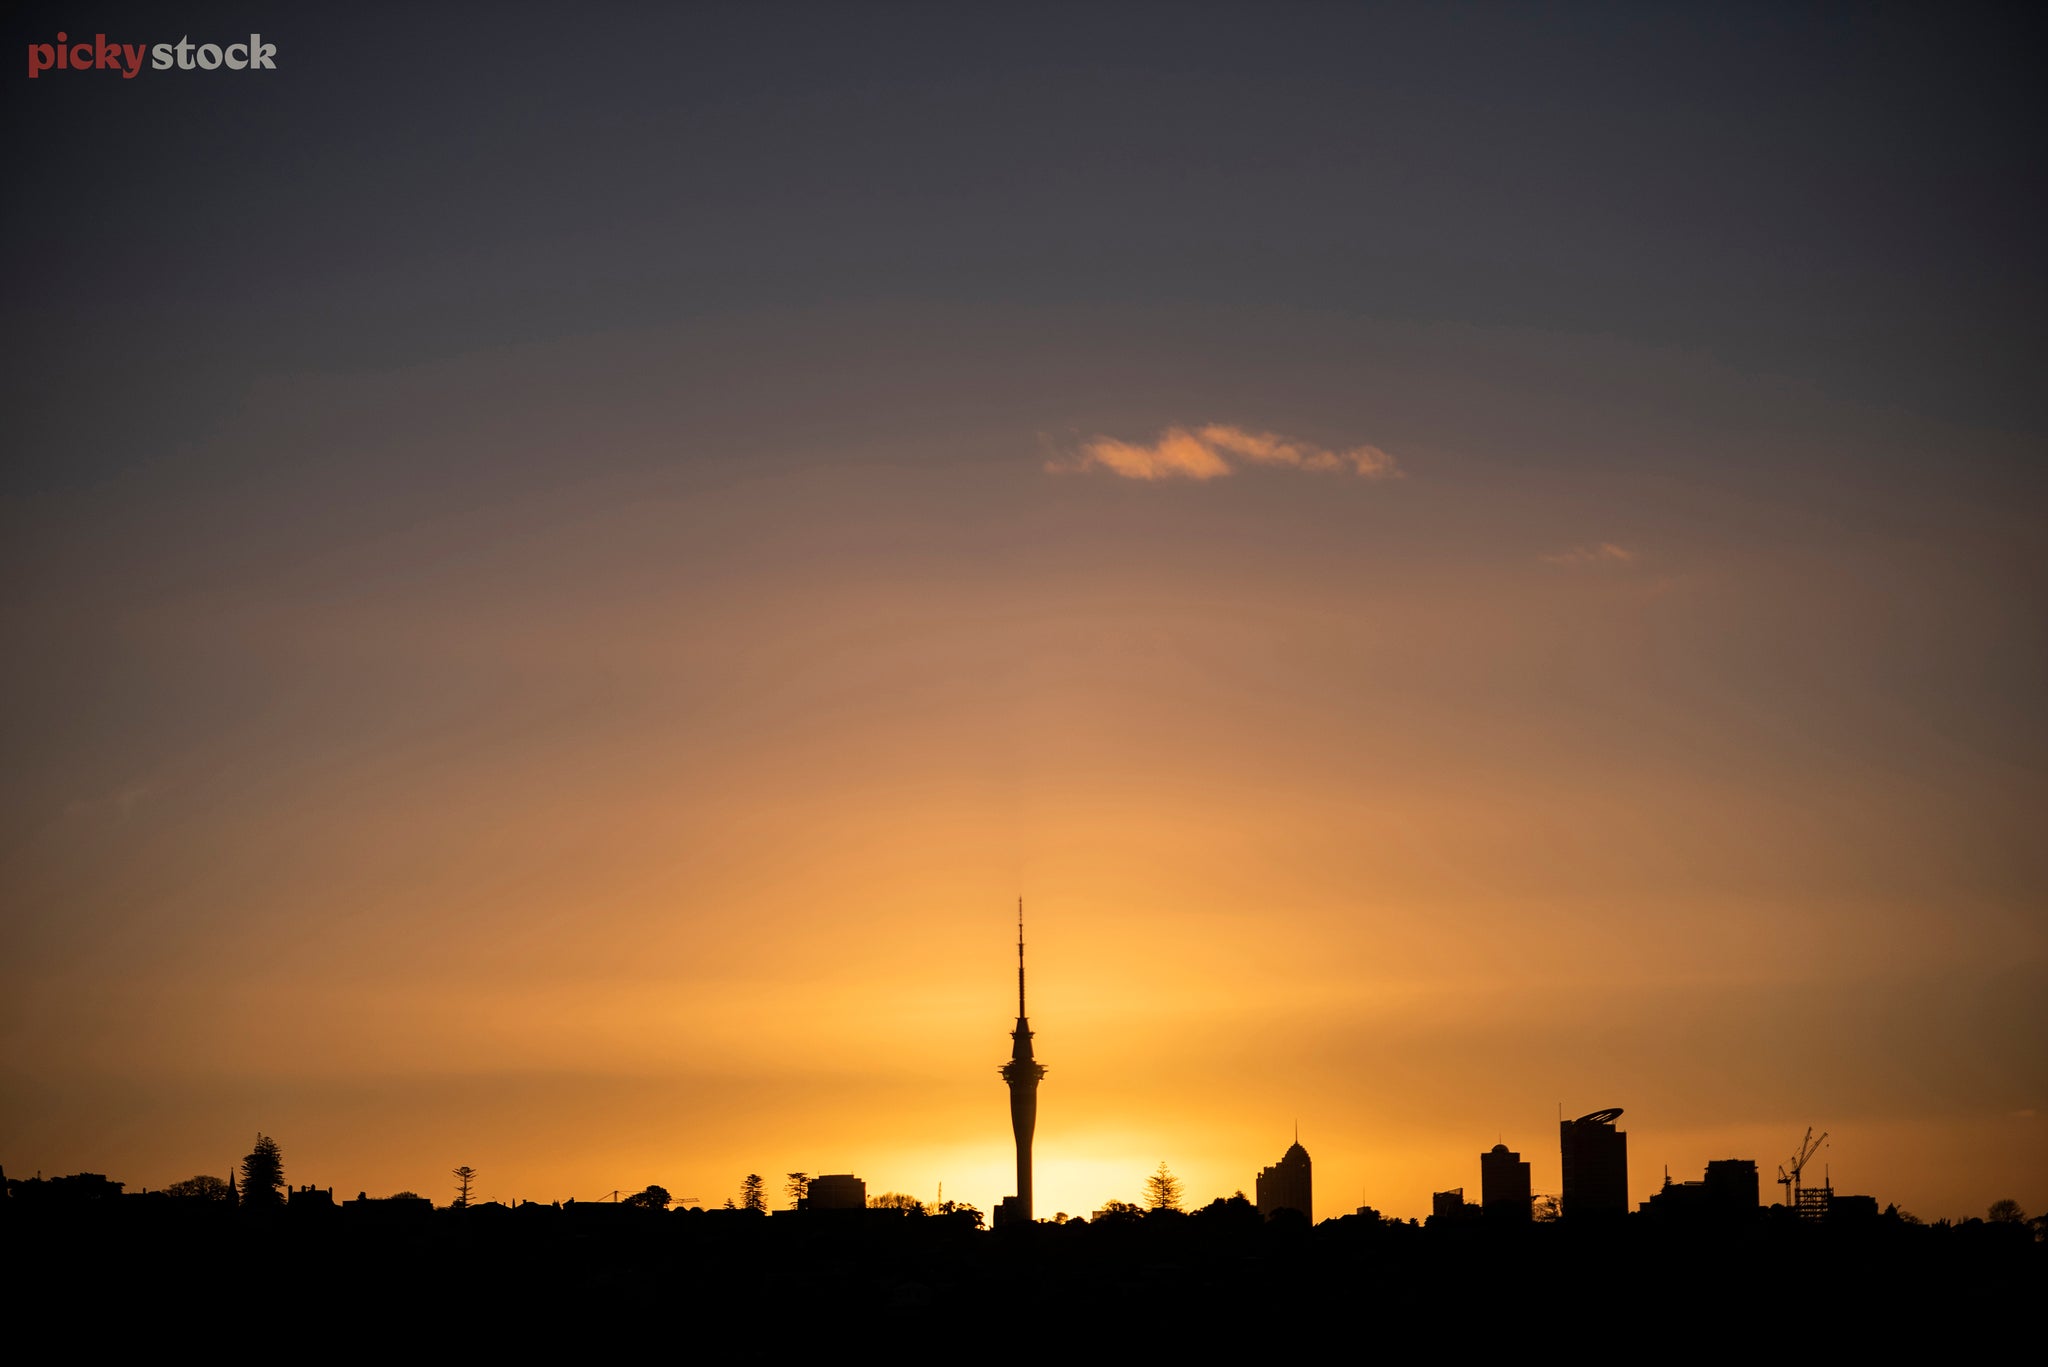 Auckland city skyline silhouette at sunset. The tall thin Sky Tower and lid at the top of the Vero bulding as well as construction cranes cut clear shapes.